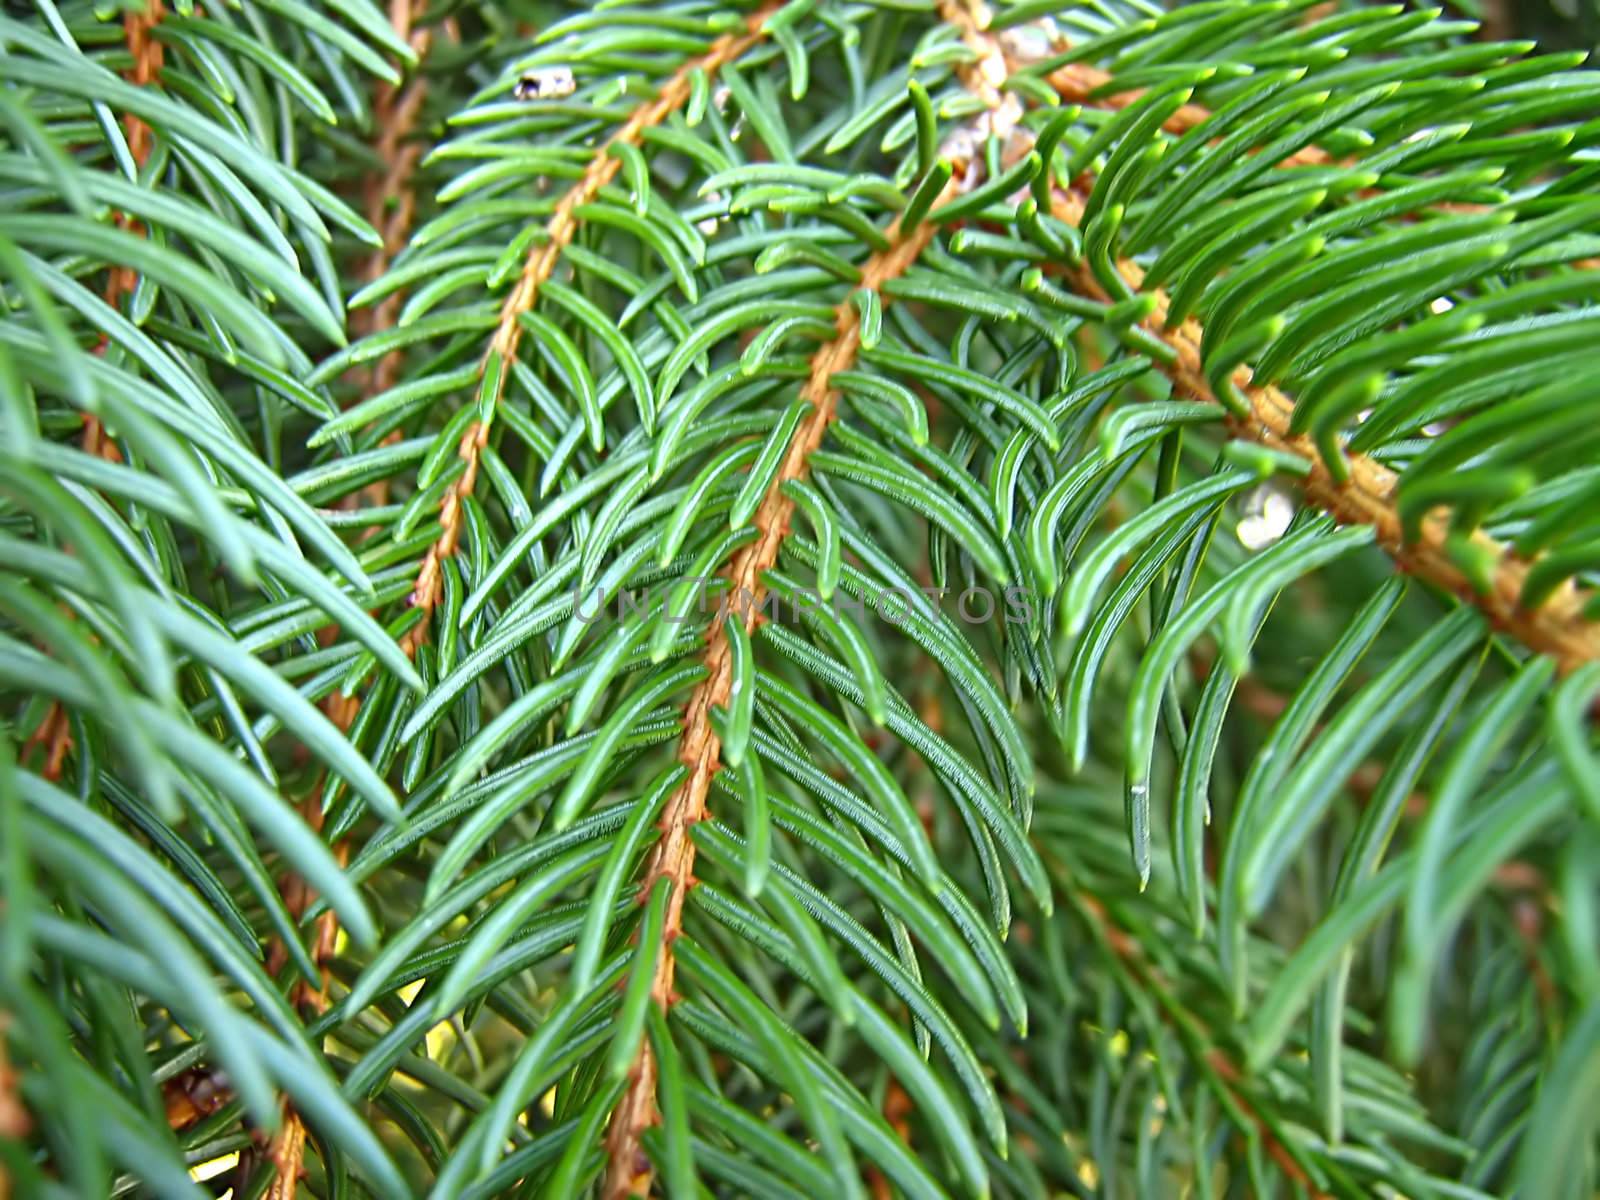 A photograph of a pine branch detailing its texture and color.